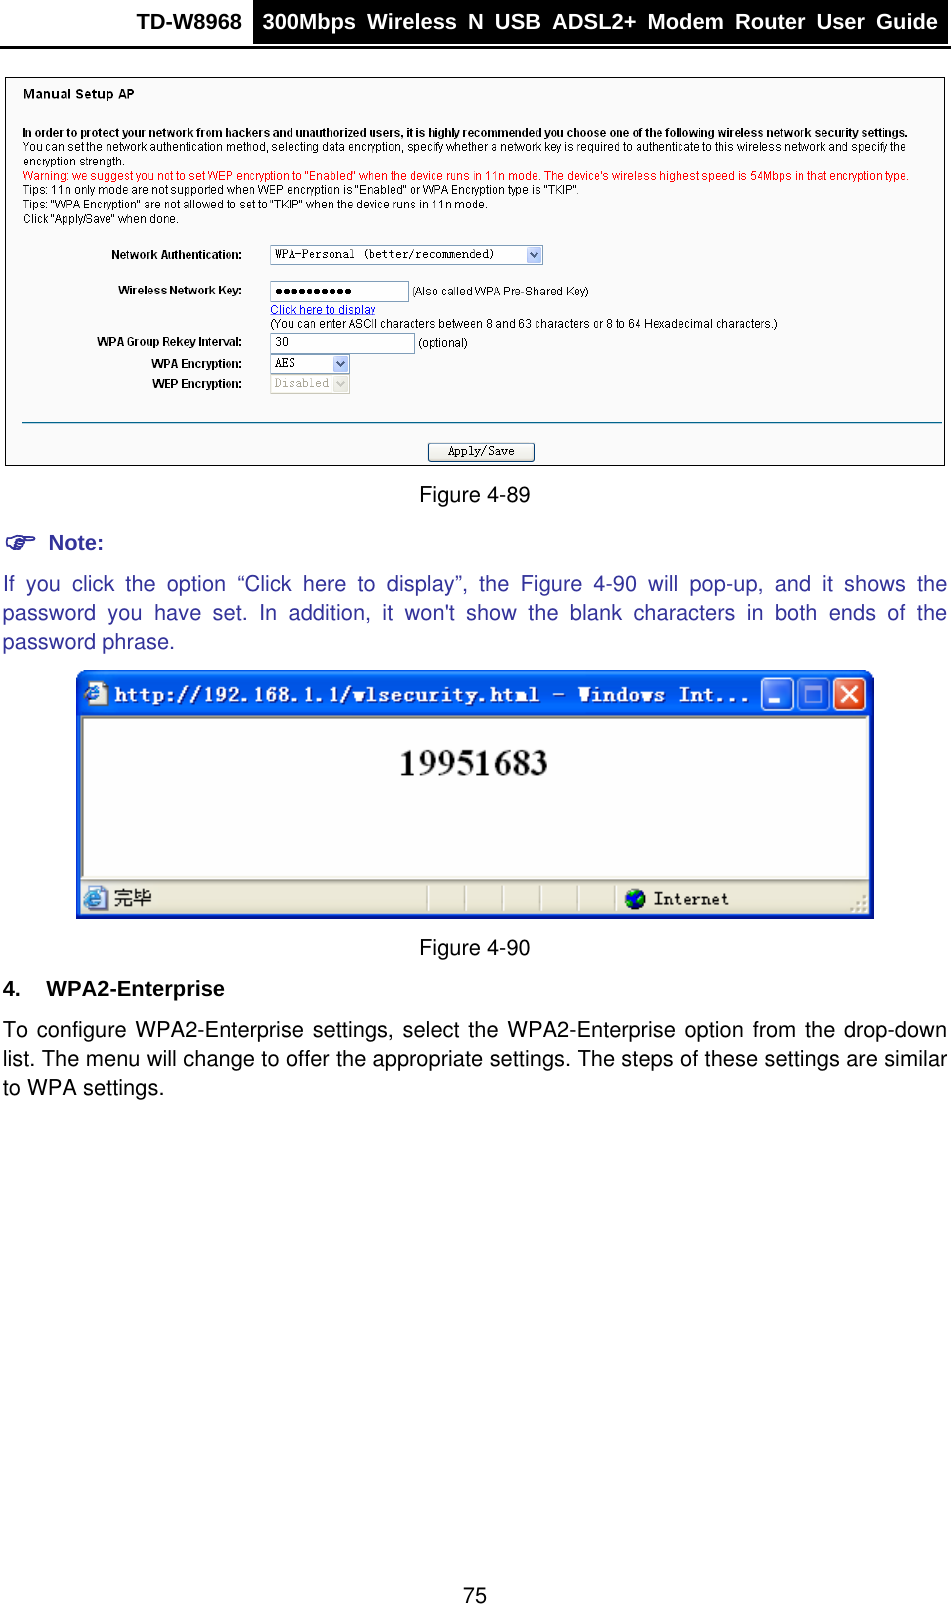 TD-W8968  300Mbps Wireless N USB ADSL2+ Modem Router User Guide   Figure 4-89 ) Note: If you click the option “Click here to display”, the Figure 4-90 will pop-up, and it shows the password you have set. In addition, it won&apos;t show the blank characters in both ends of the password phrase.  Figure 4-90 4. WPA2-Enterprise To configure WPA2-Enterprise settings, select the WPA2-Enterprise option from the drop-down list. The menu will change to offer the appropriate settings. The steps of these settings are similar to WPA settings. 75 